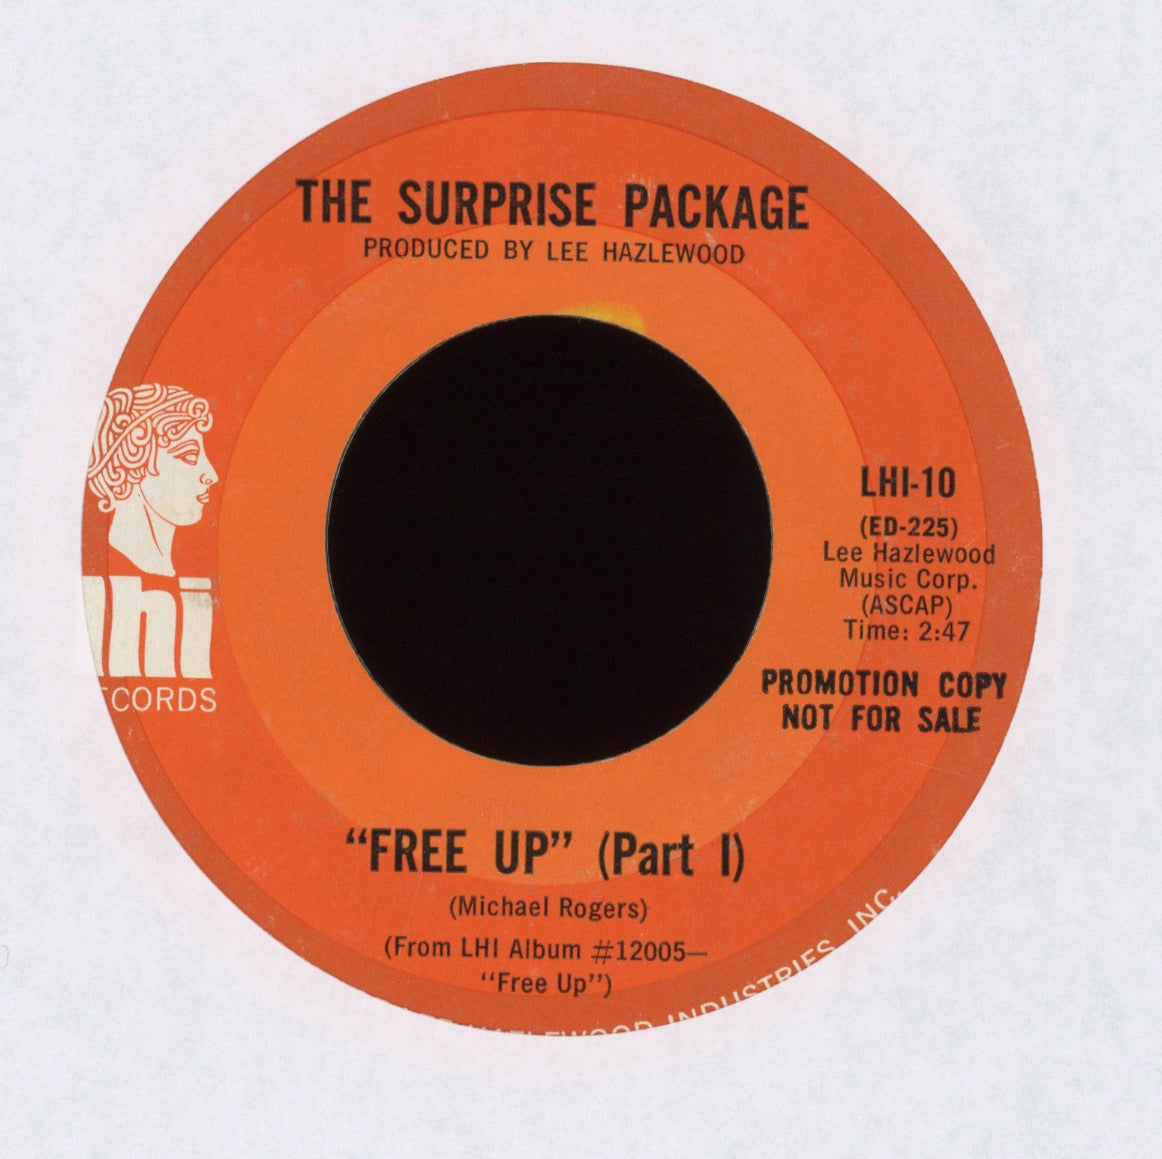 The Surprise Package - Free Up on LHI Promo